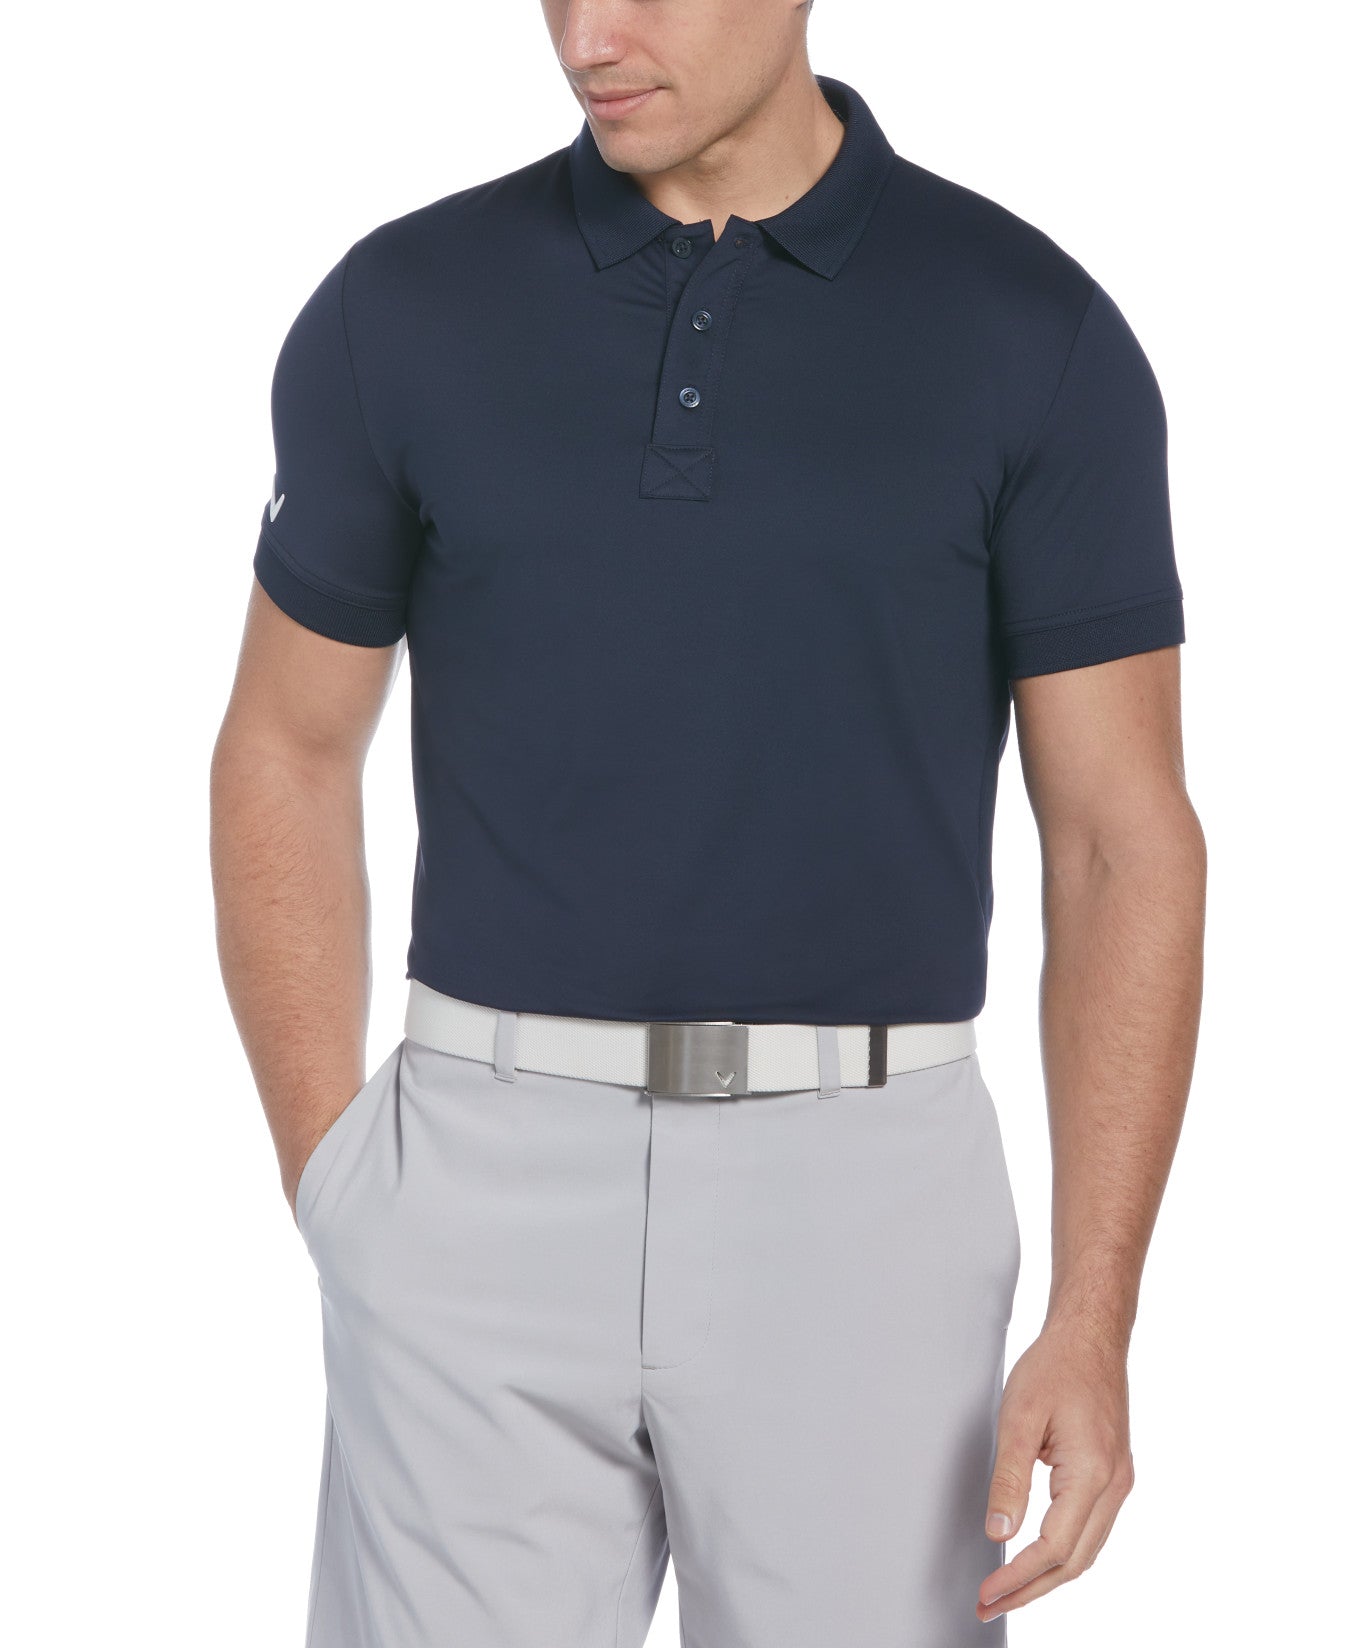 View X Series Solid Ribbed Polo In Navy Blazer information